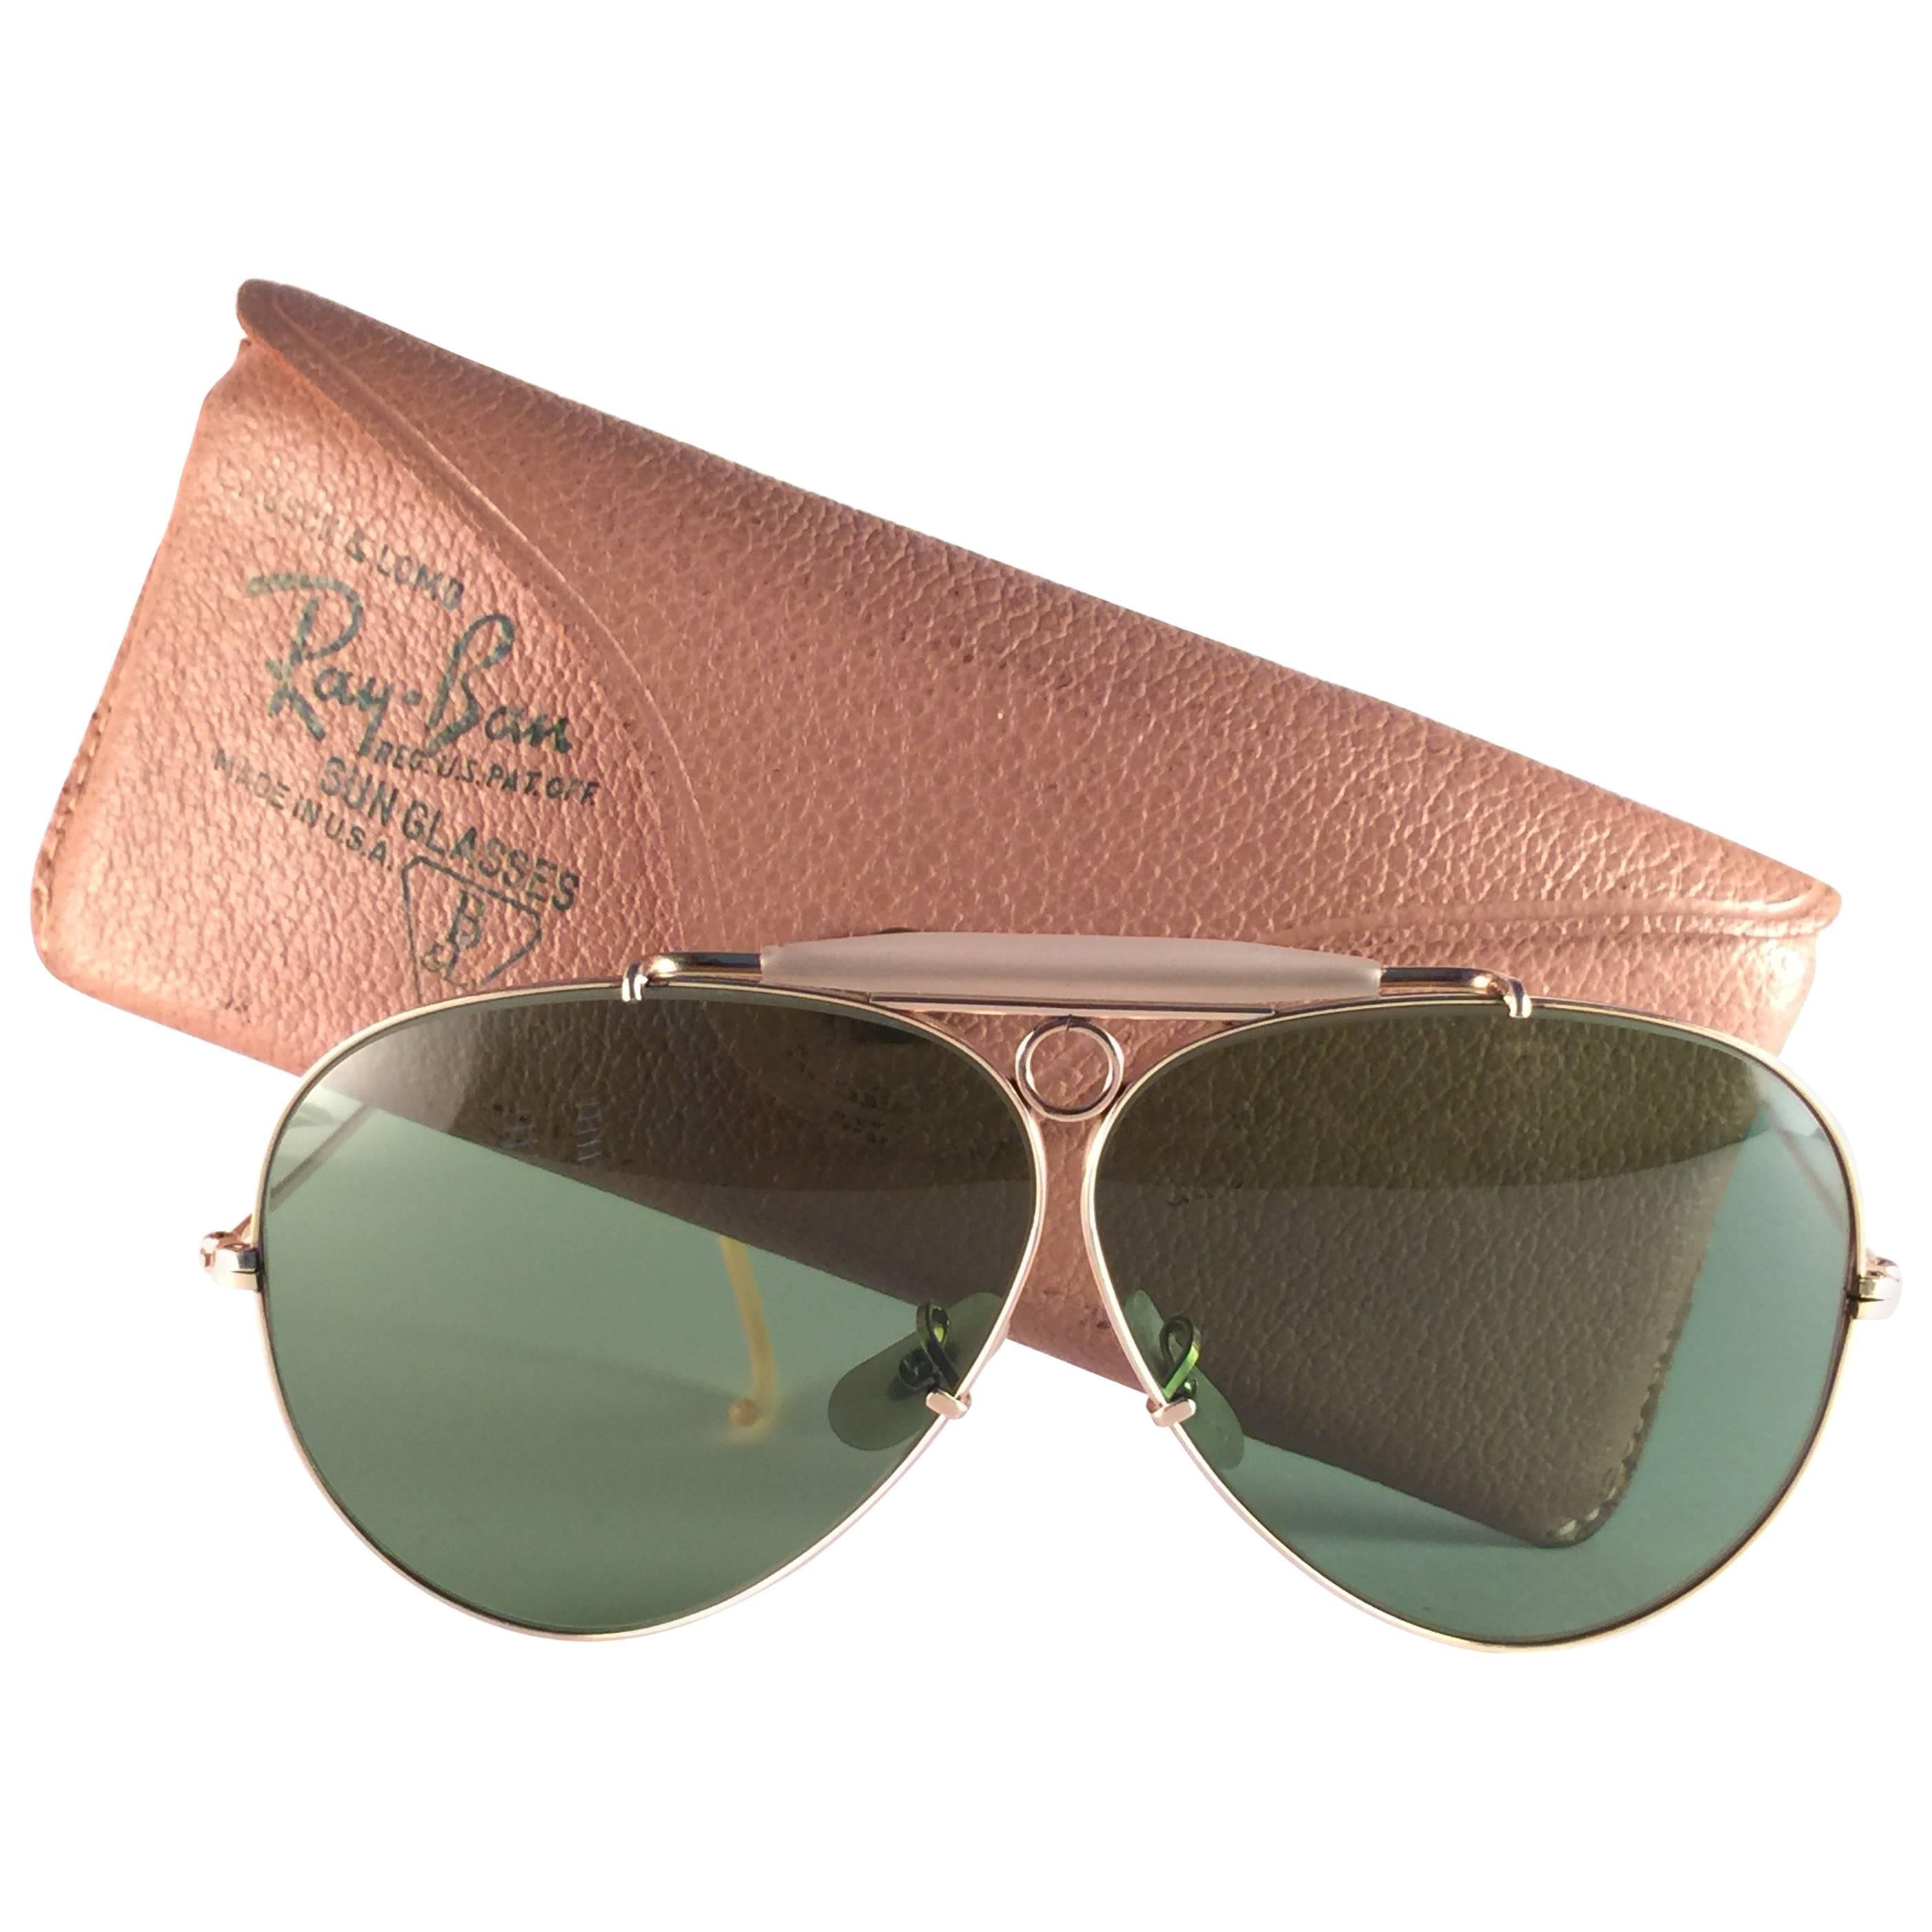 New Ray Ban Shooter 1950's Classic 12K Gold Filled Collectors B&L USA Sunglasses